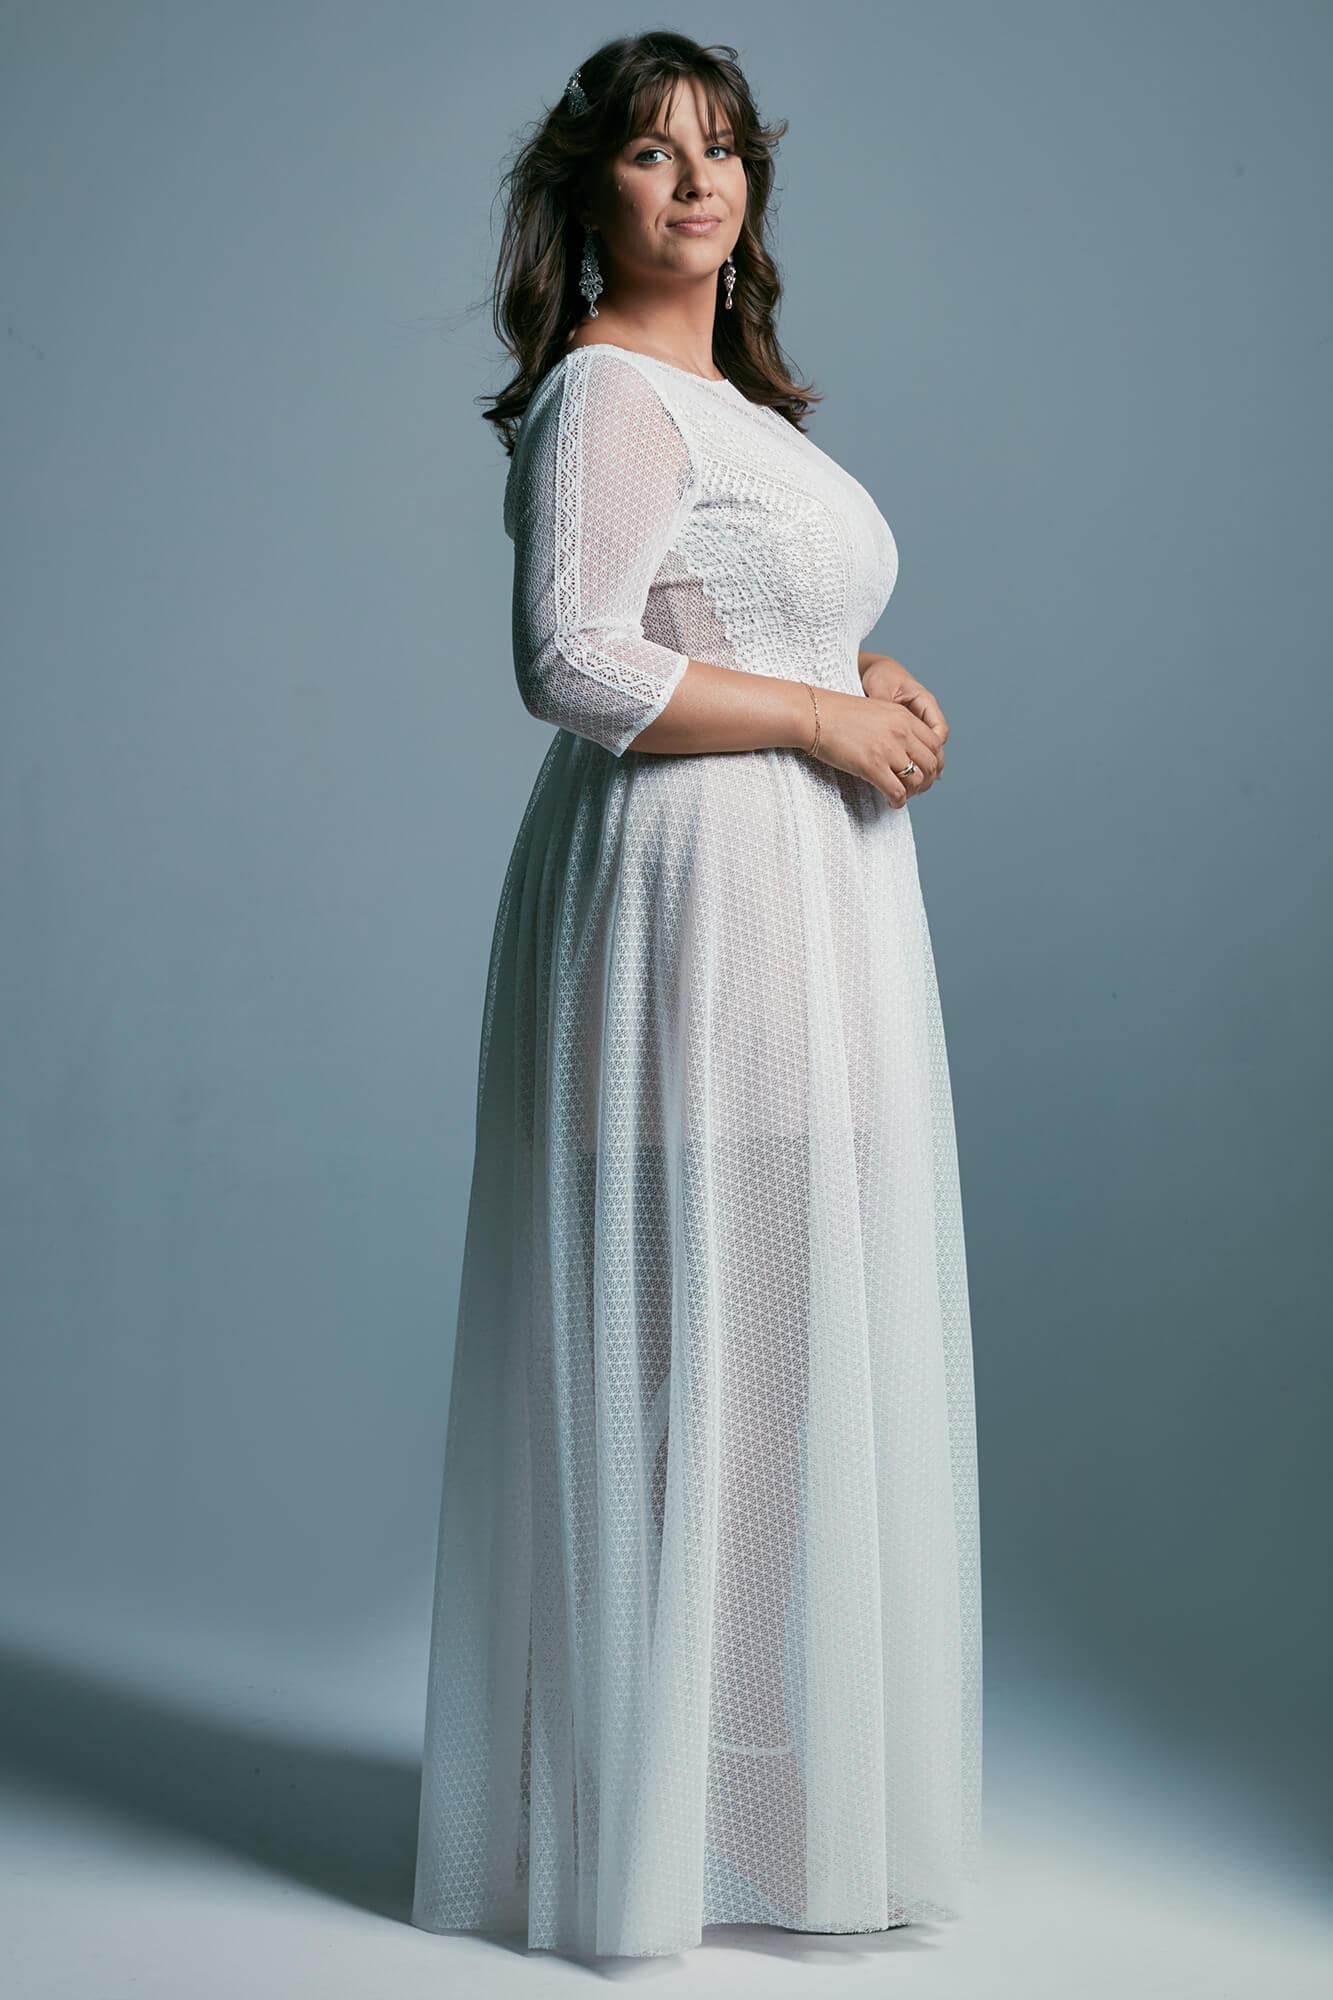 Plus size wedding dress with 3/4 sleeves and a boat neckline Santorini 7 plus size